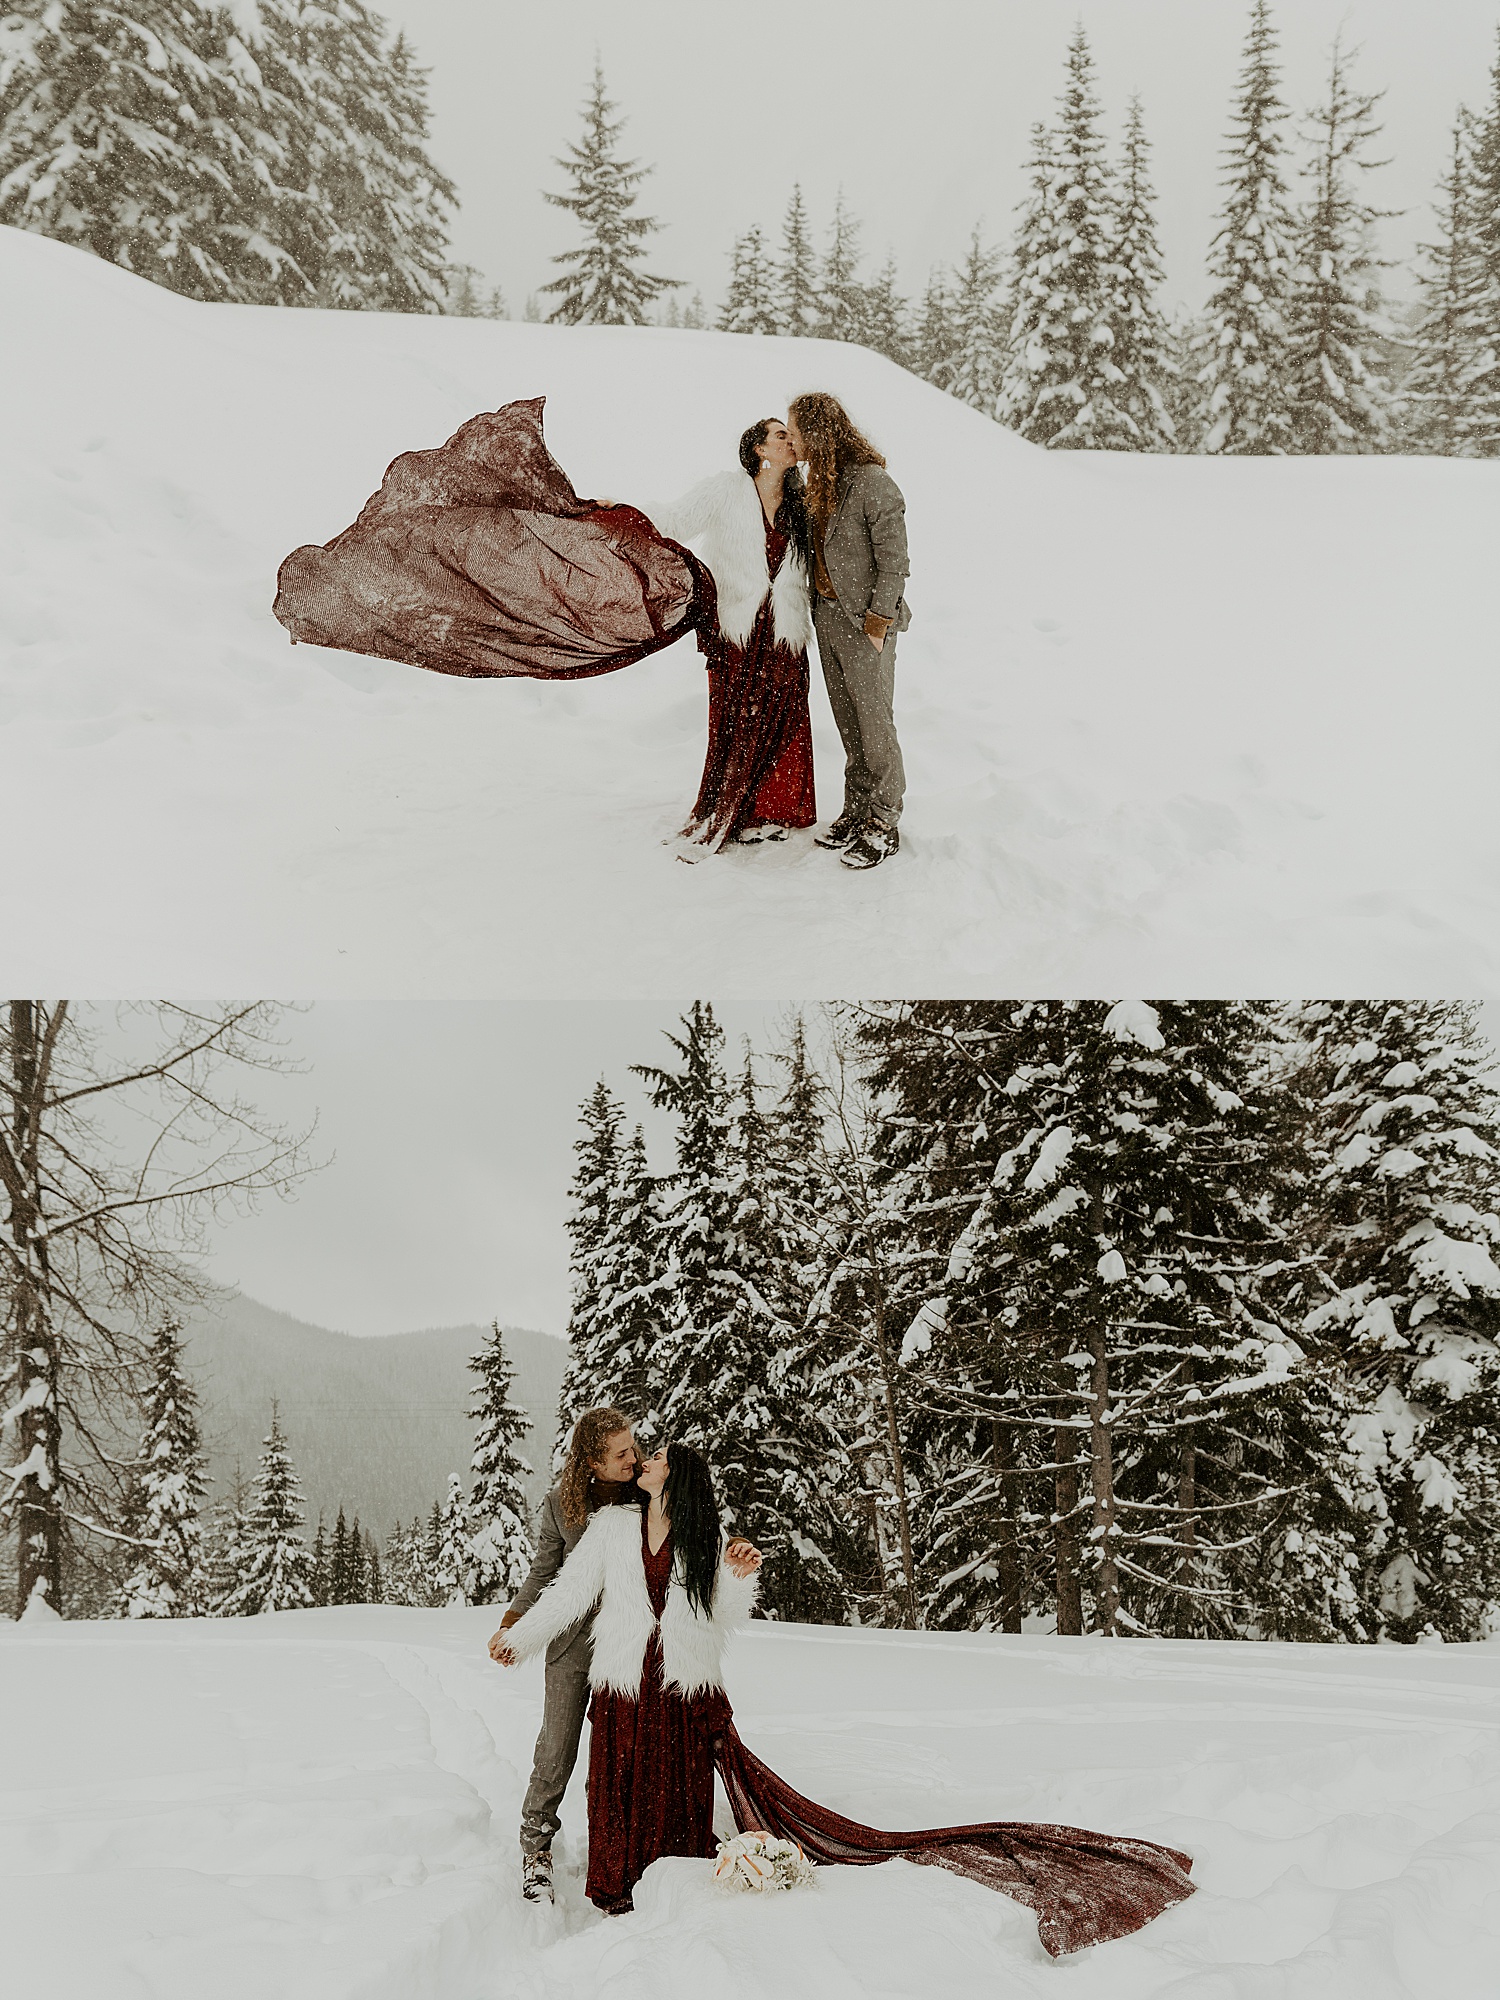 snowy washington winter elopement couples portraits with the bride wearing a red dress